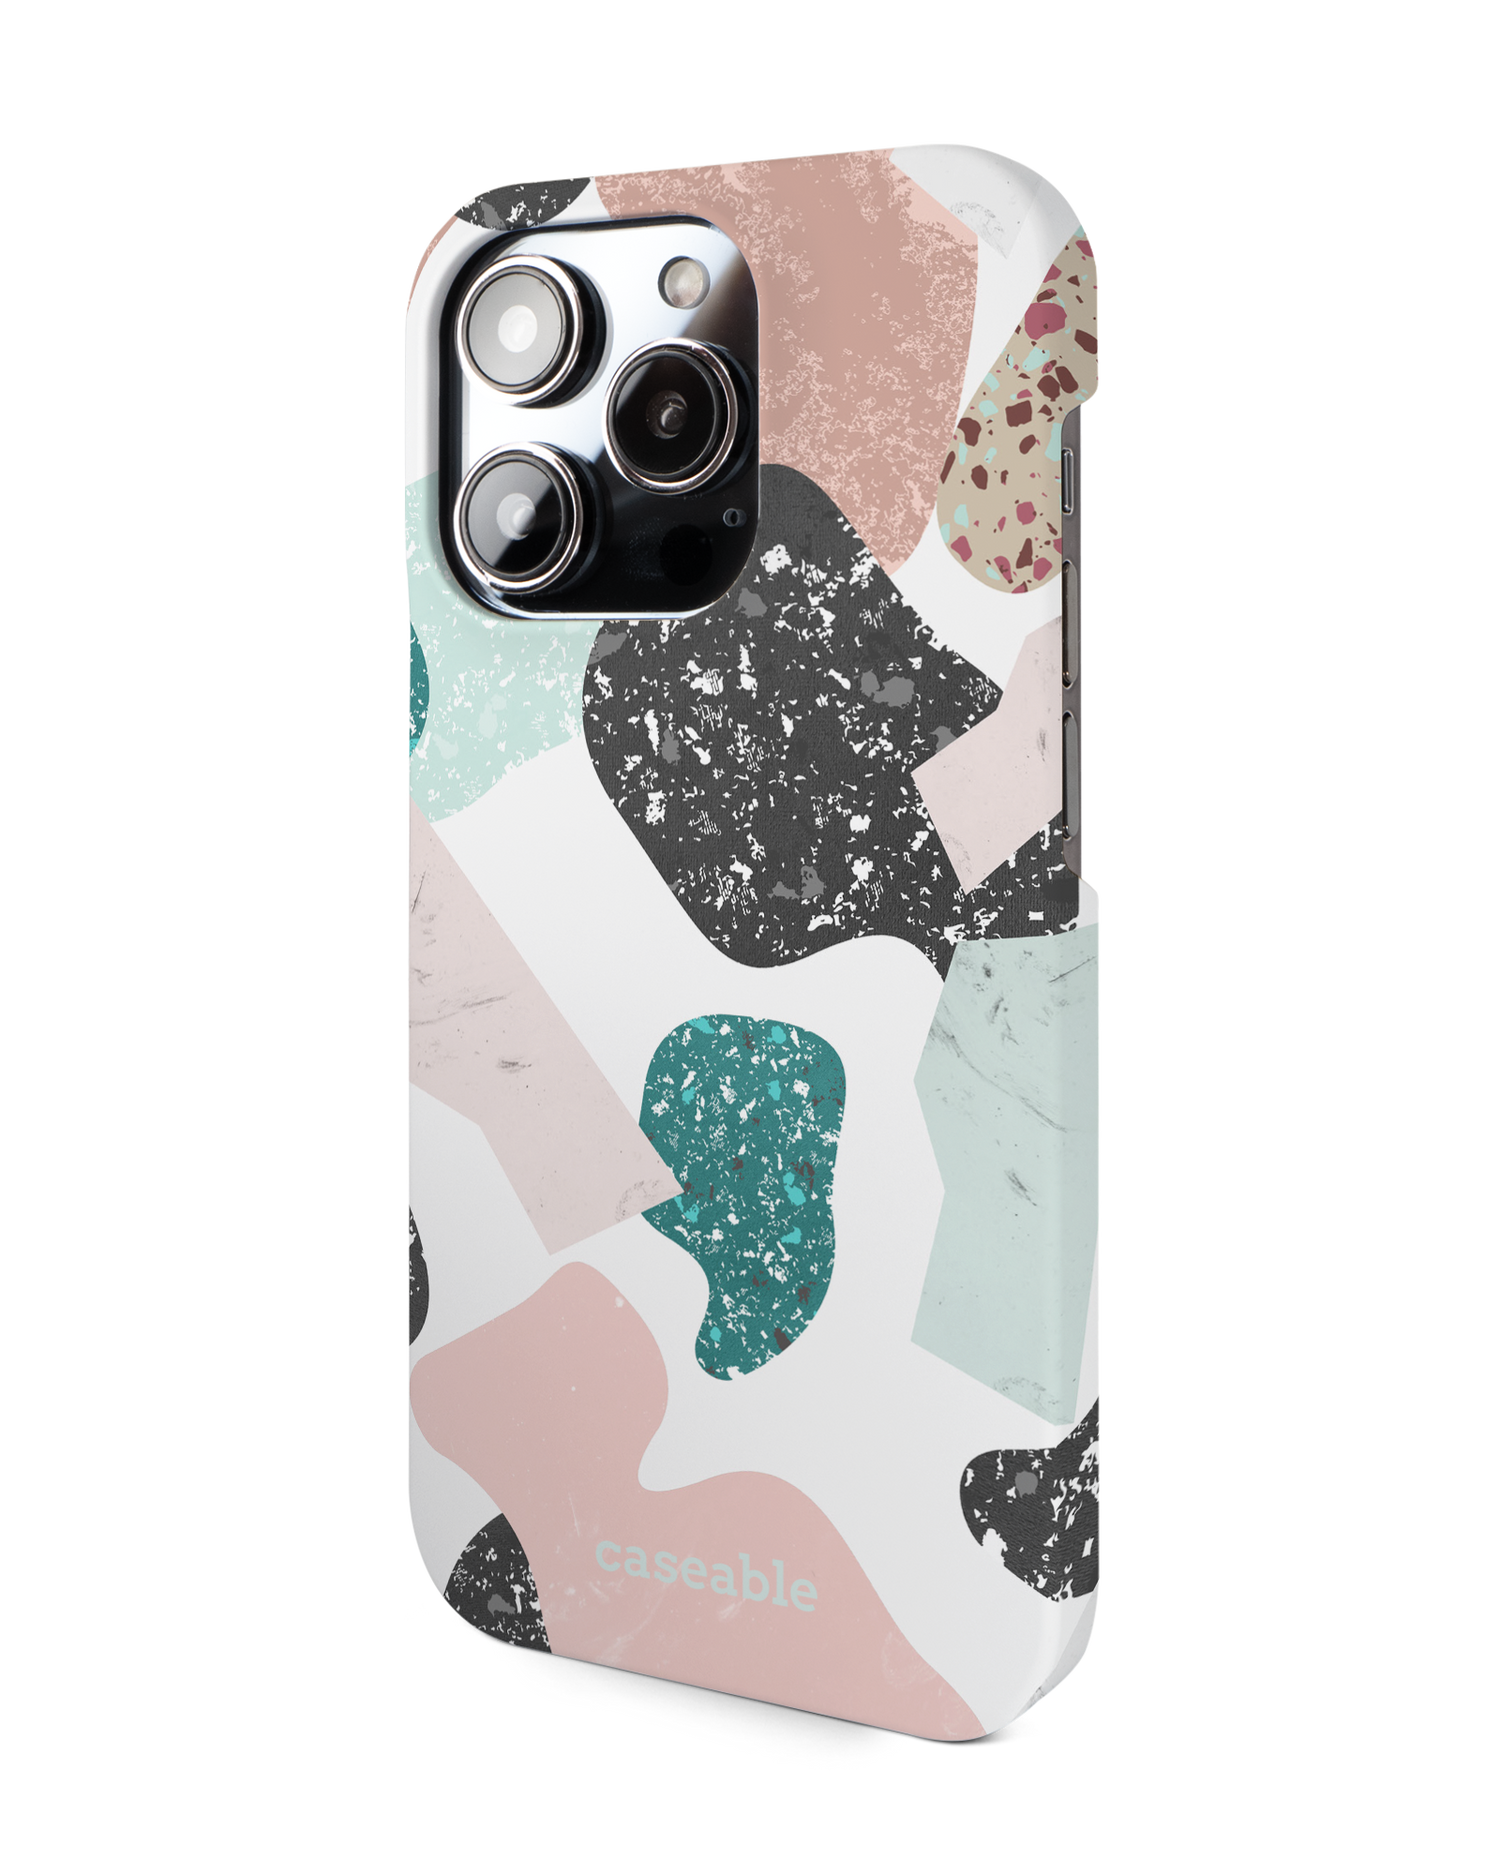 Scattered Shapes Hard Shell Phone Case for Apple iPhone 14 Pro: View from the right side